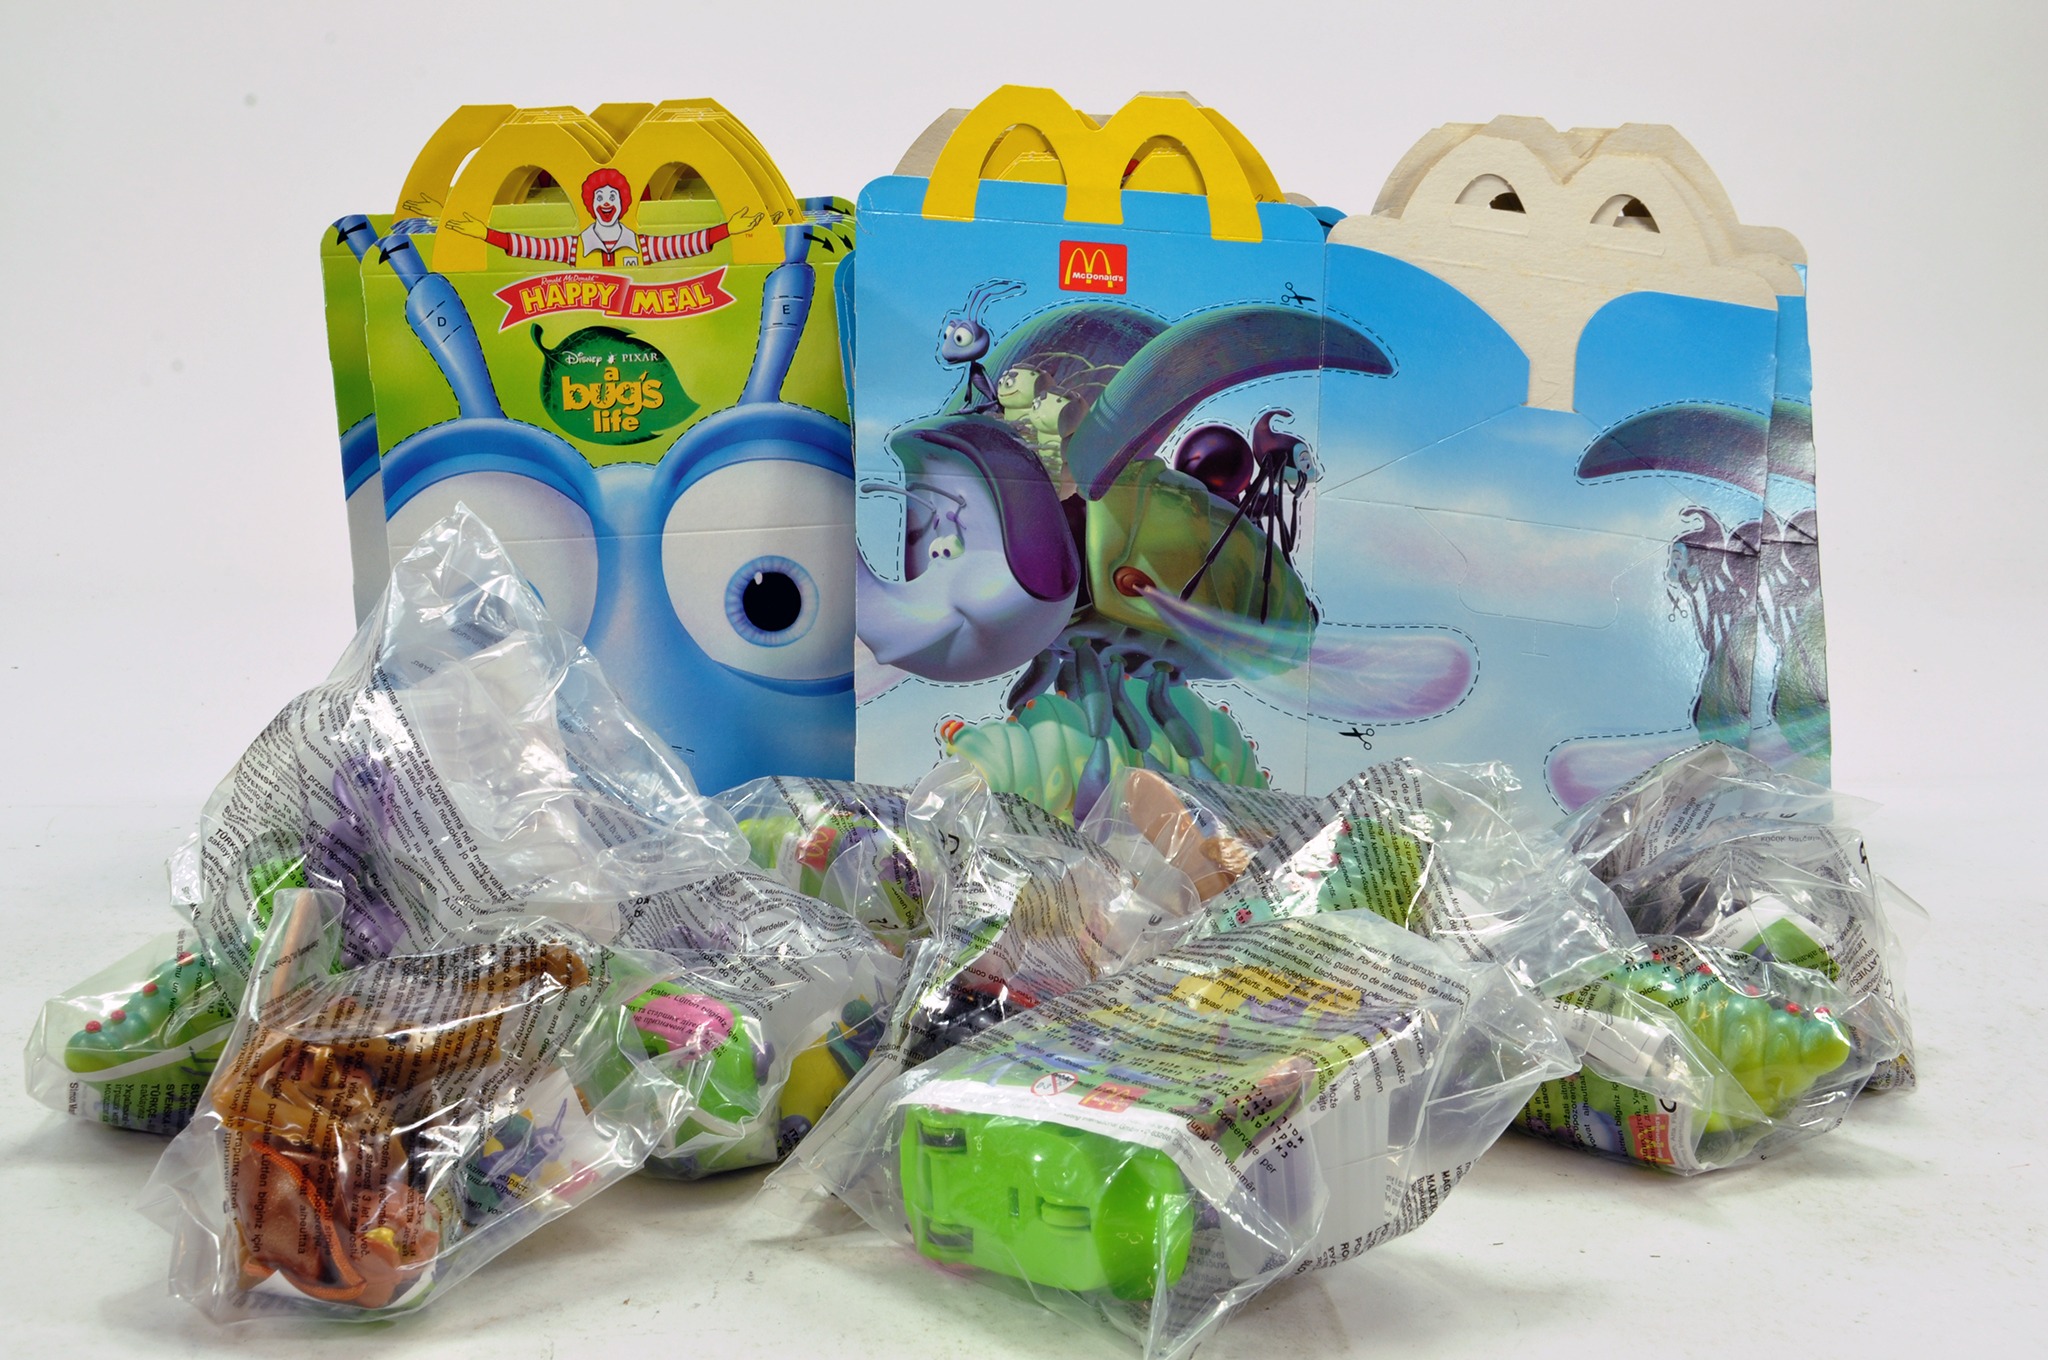 Macdonalds Happy Meal Toy Group comprising items from Bugs Life Series including Toys and Unfolded